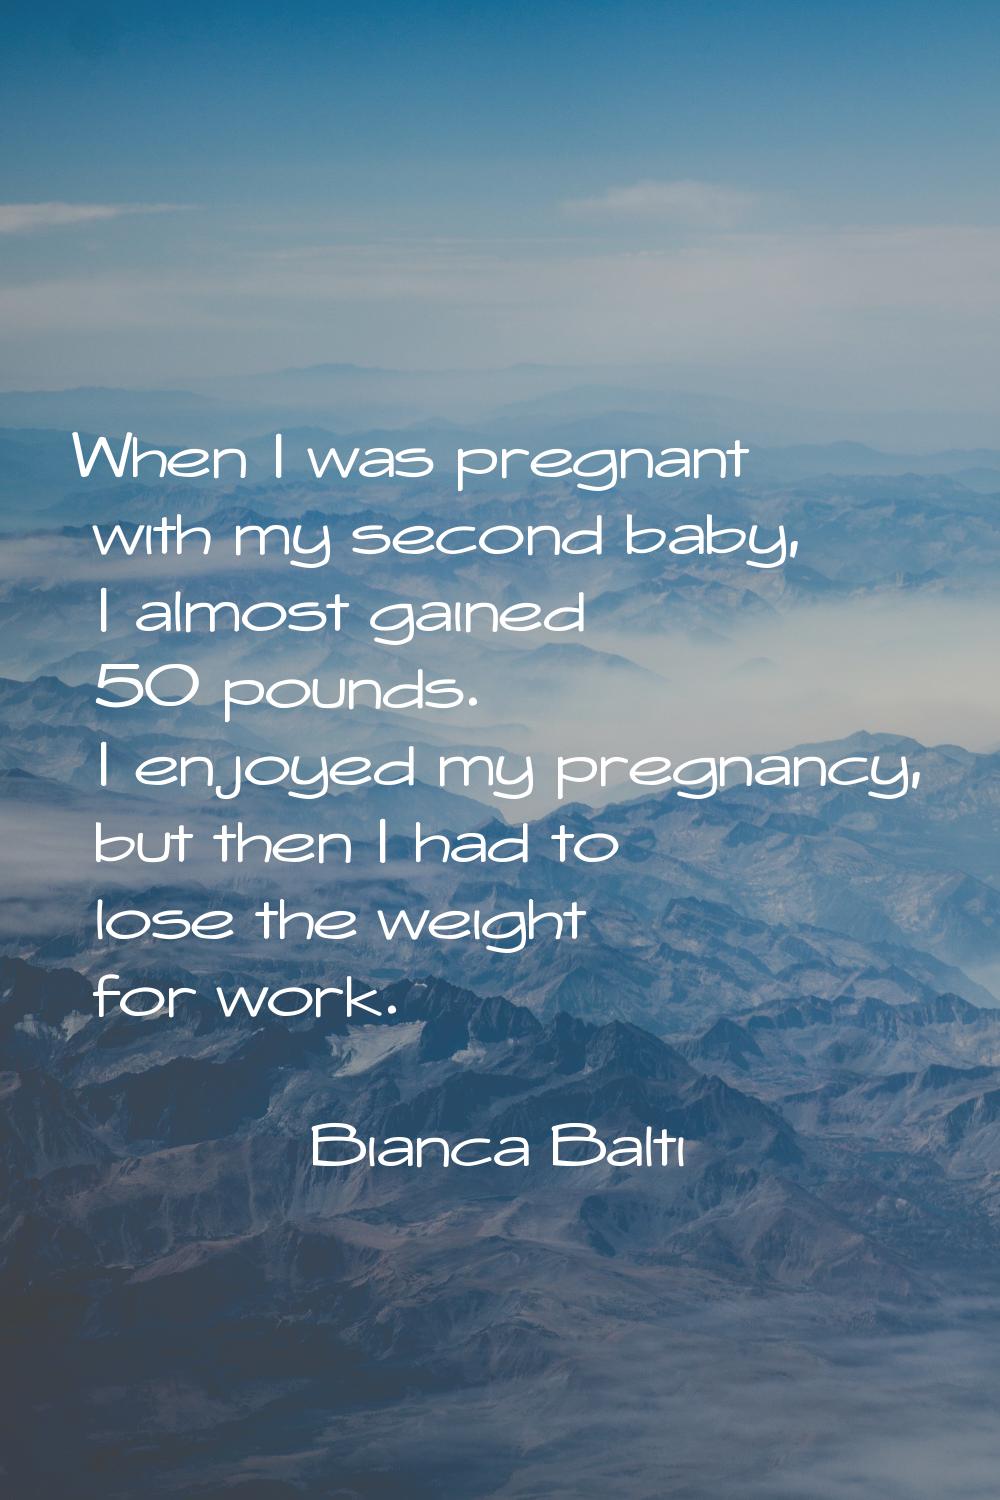 When I was pregnant with my second baby, I almost gained 50 pounds. I enjoyed my pregnancy, but the